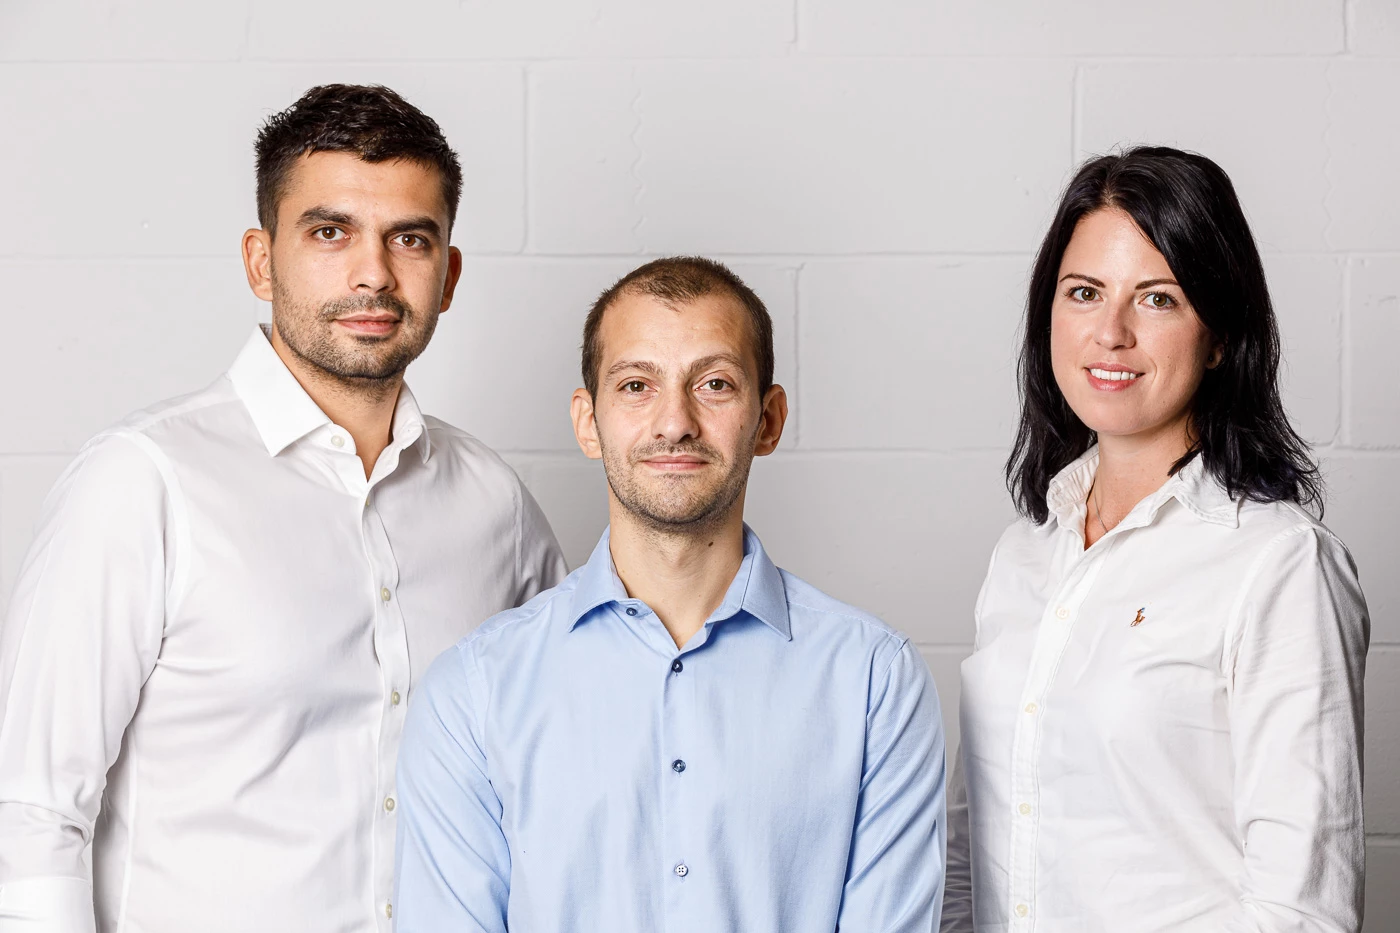 Left to right Adrian Negoita (Co-founder) Andrei Danescu (Co-founder) and Oana Jinga (Co-founder)